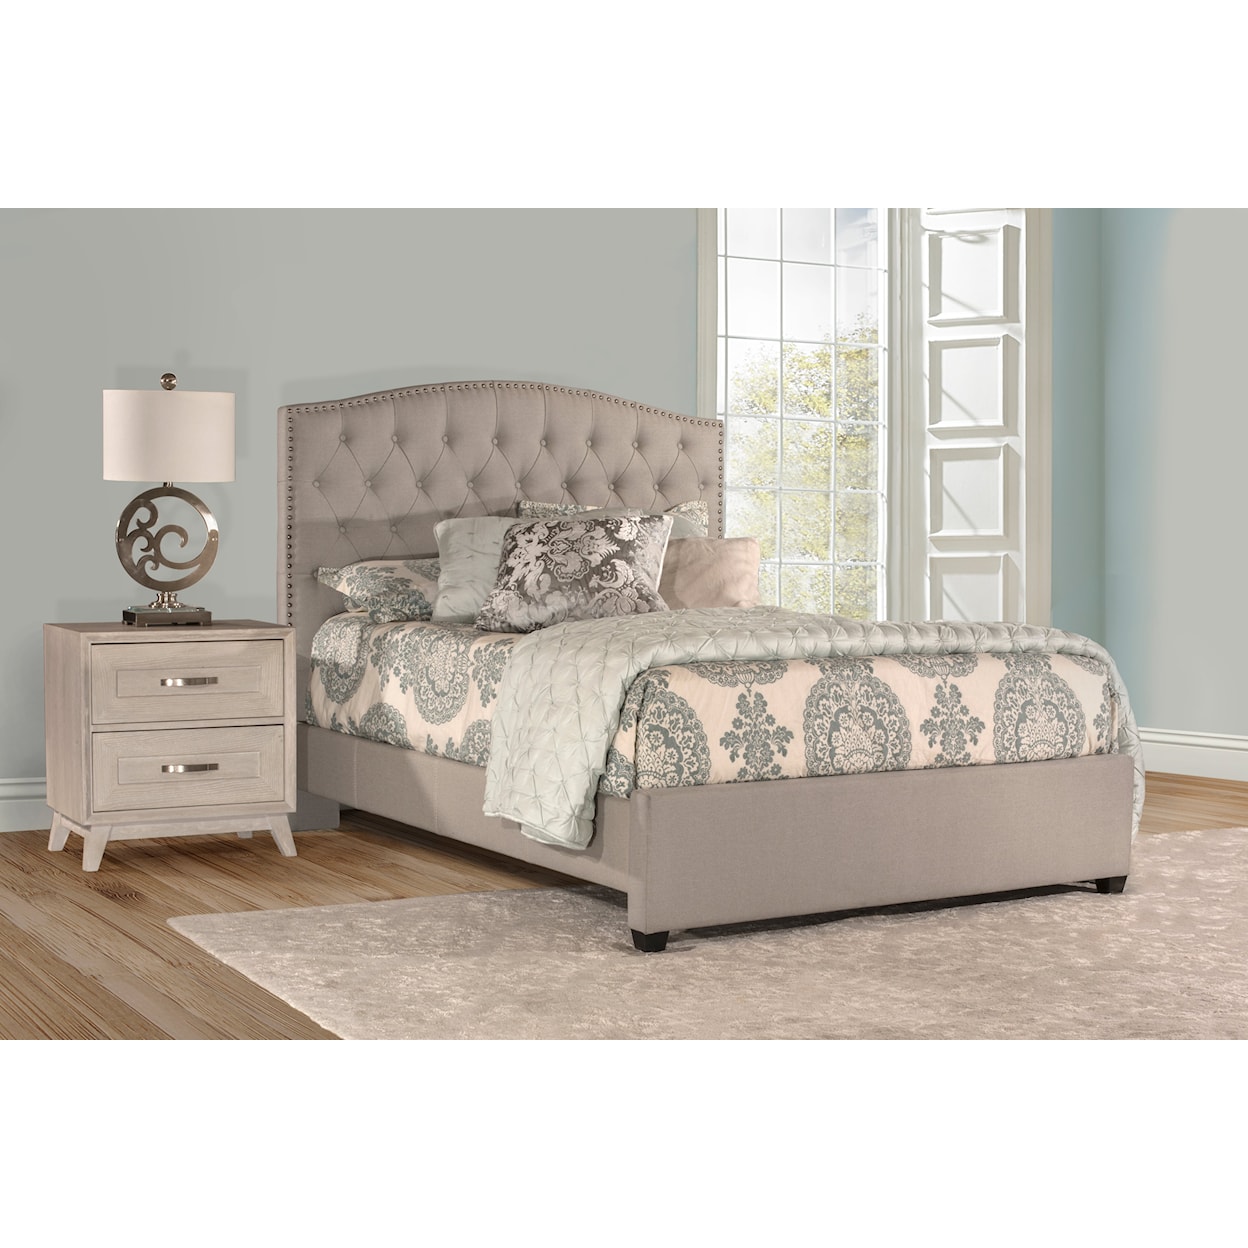 Hillsdale Lila Cal King Bed